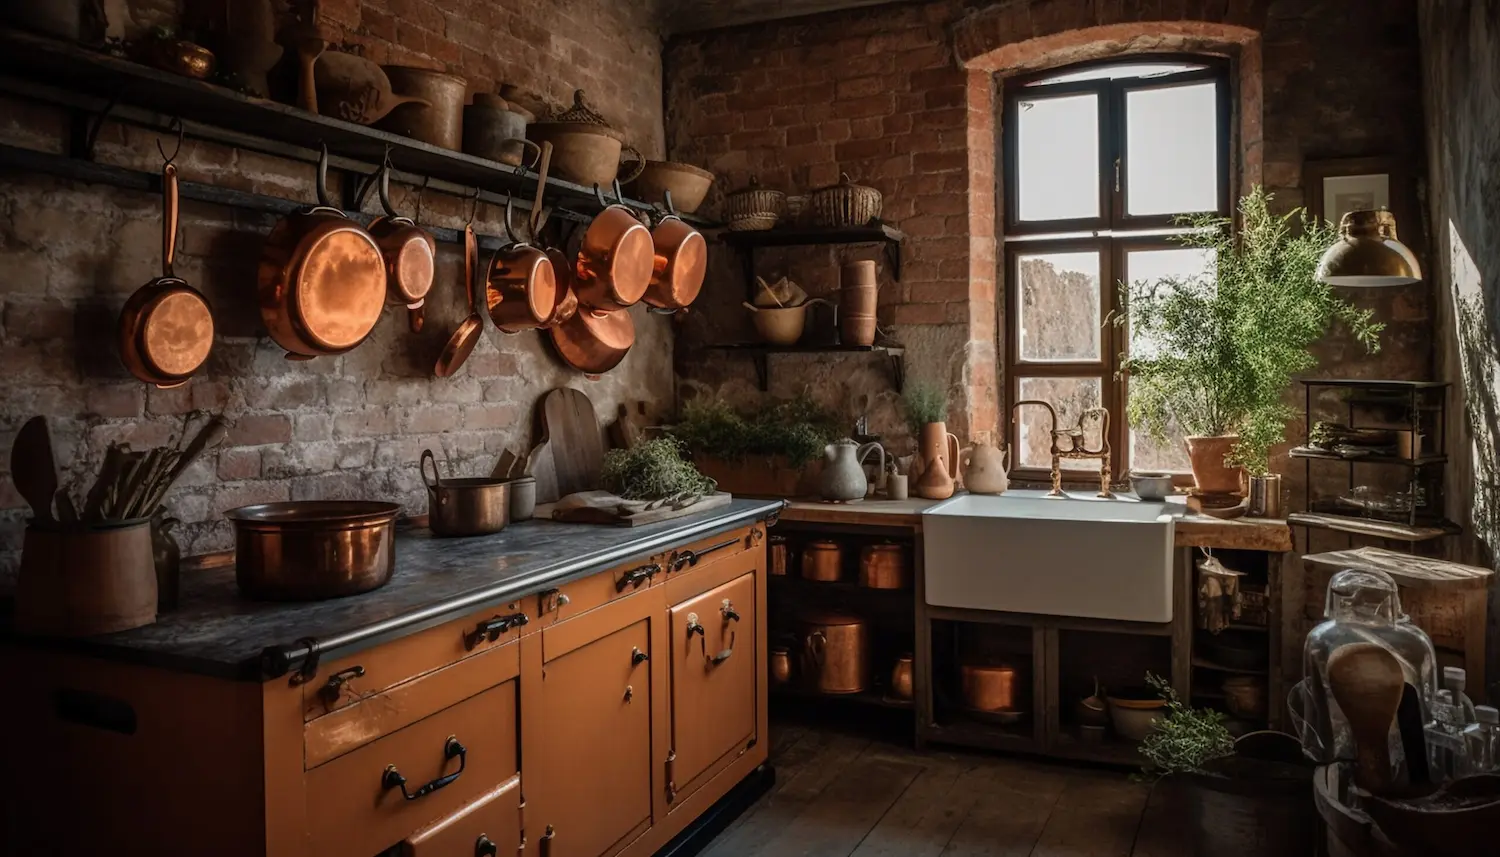 https://hpgconsulting.com/wp-content/uploads/2023/08/rustic-kitchen-with-modern-appliances-inside-generated-by-ai-scaled-1.webp